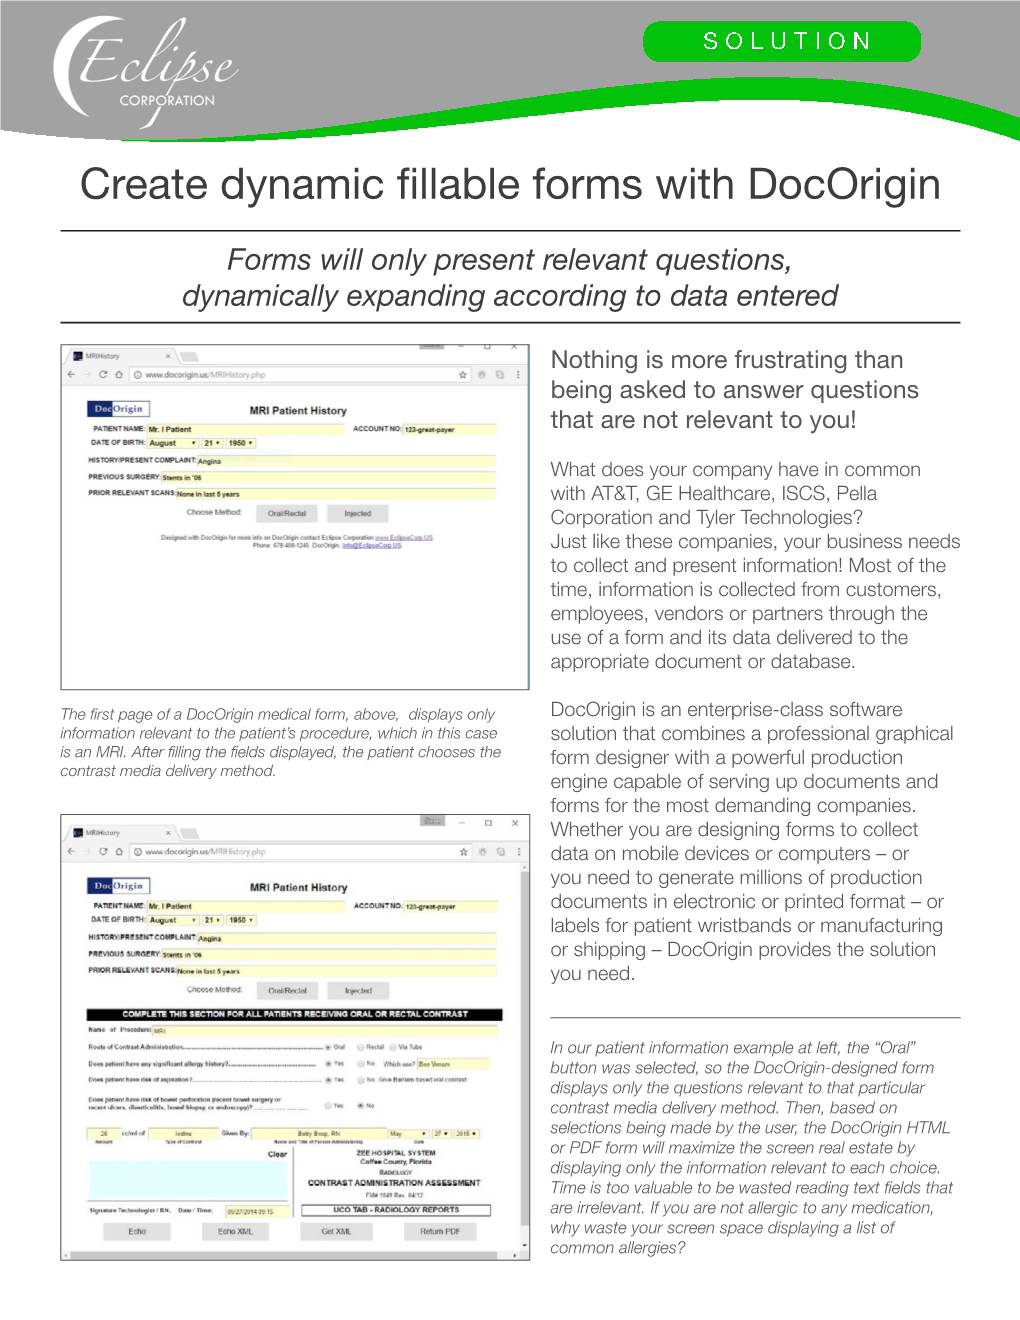 Create Dynamic Fillable Forms with Docorigin